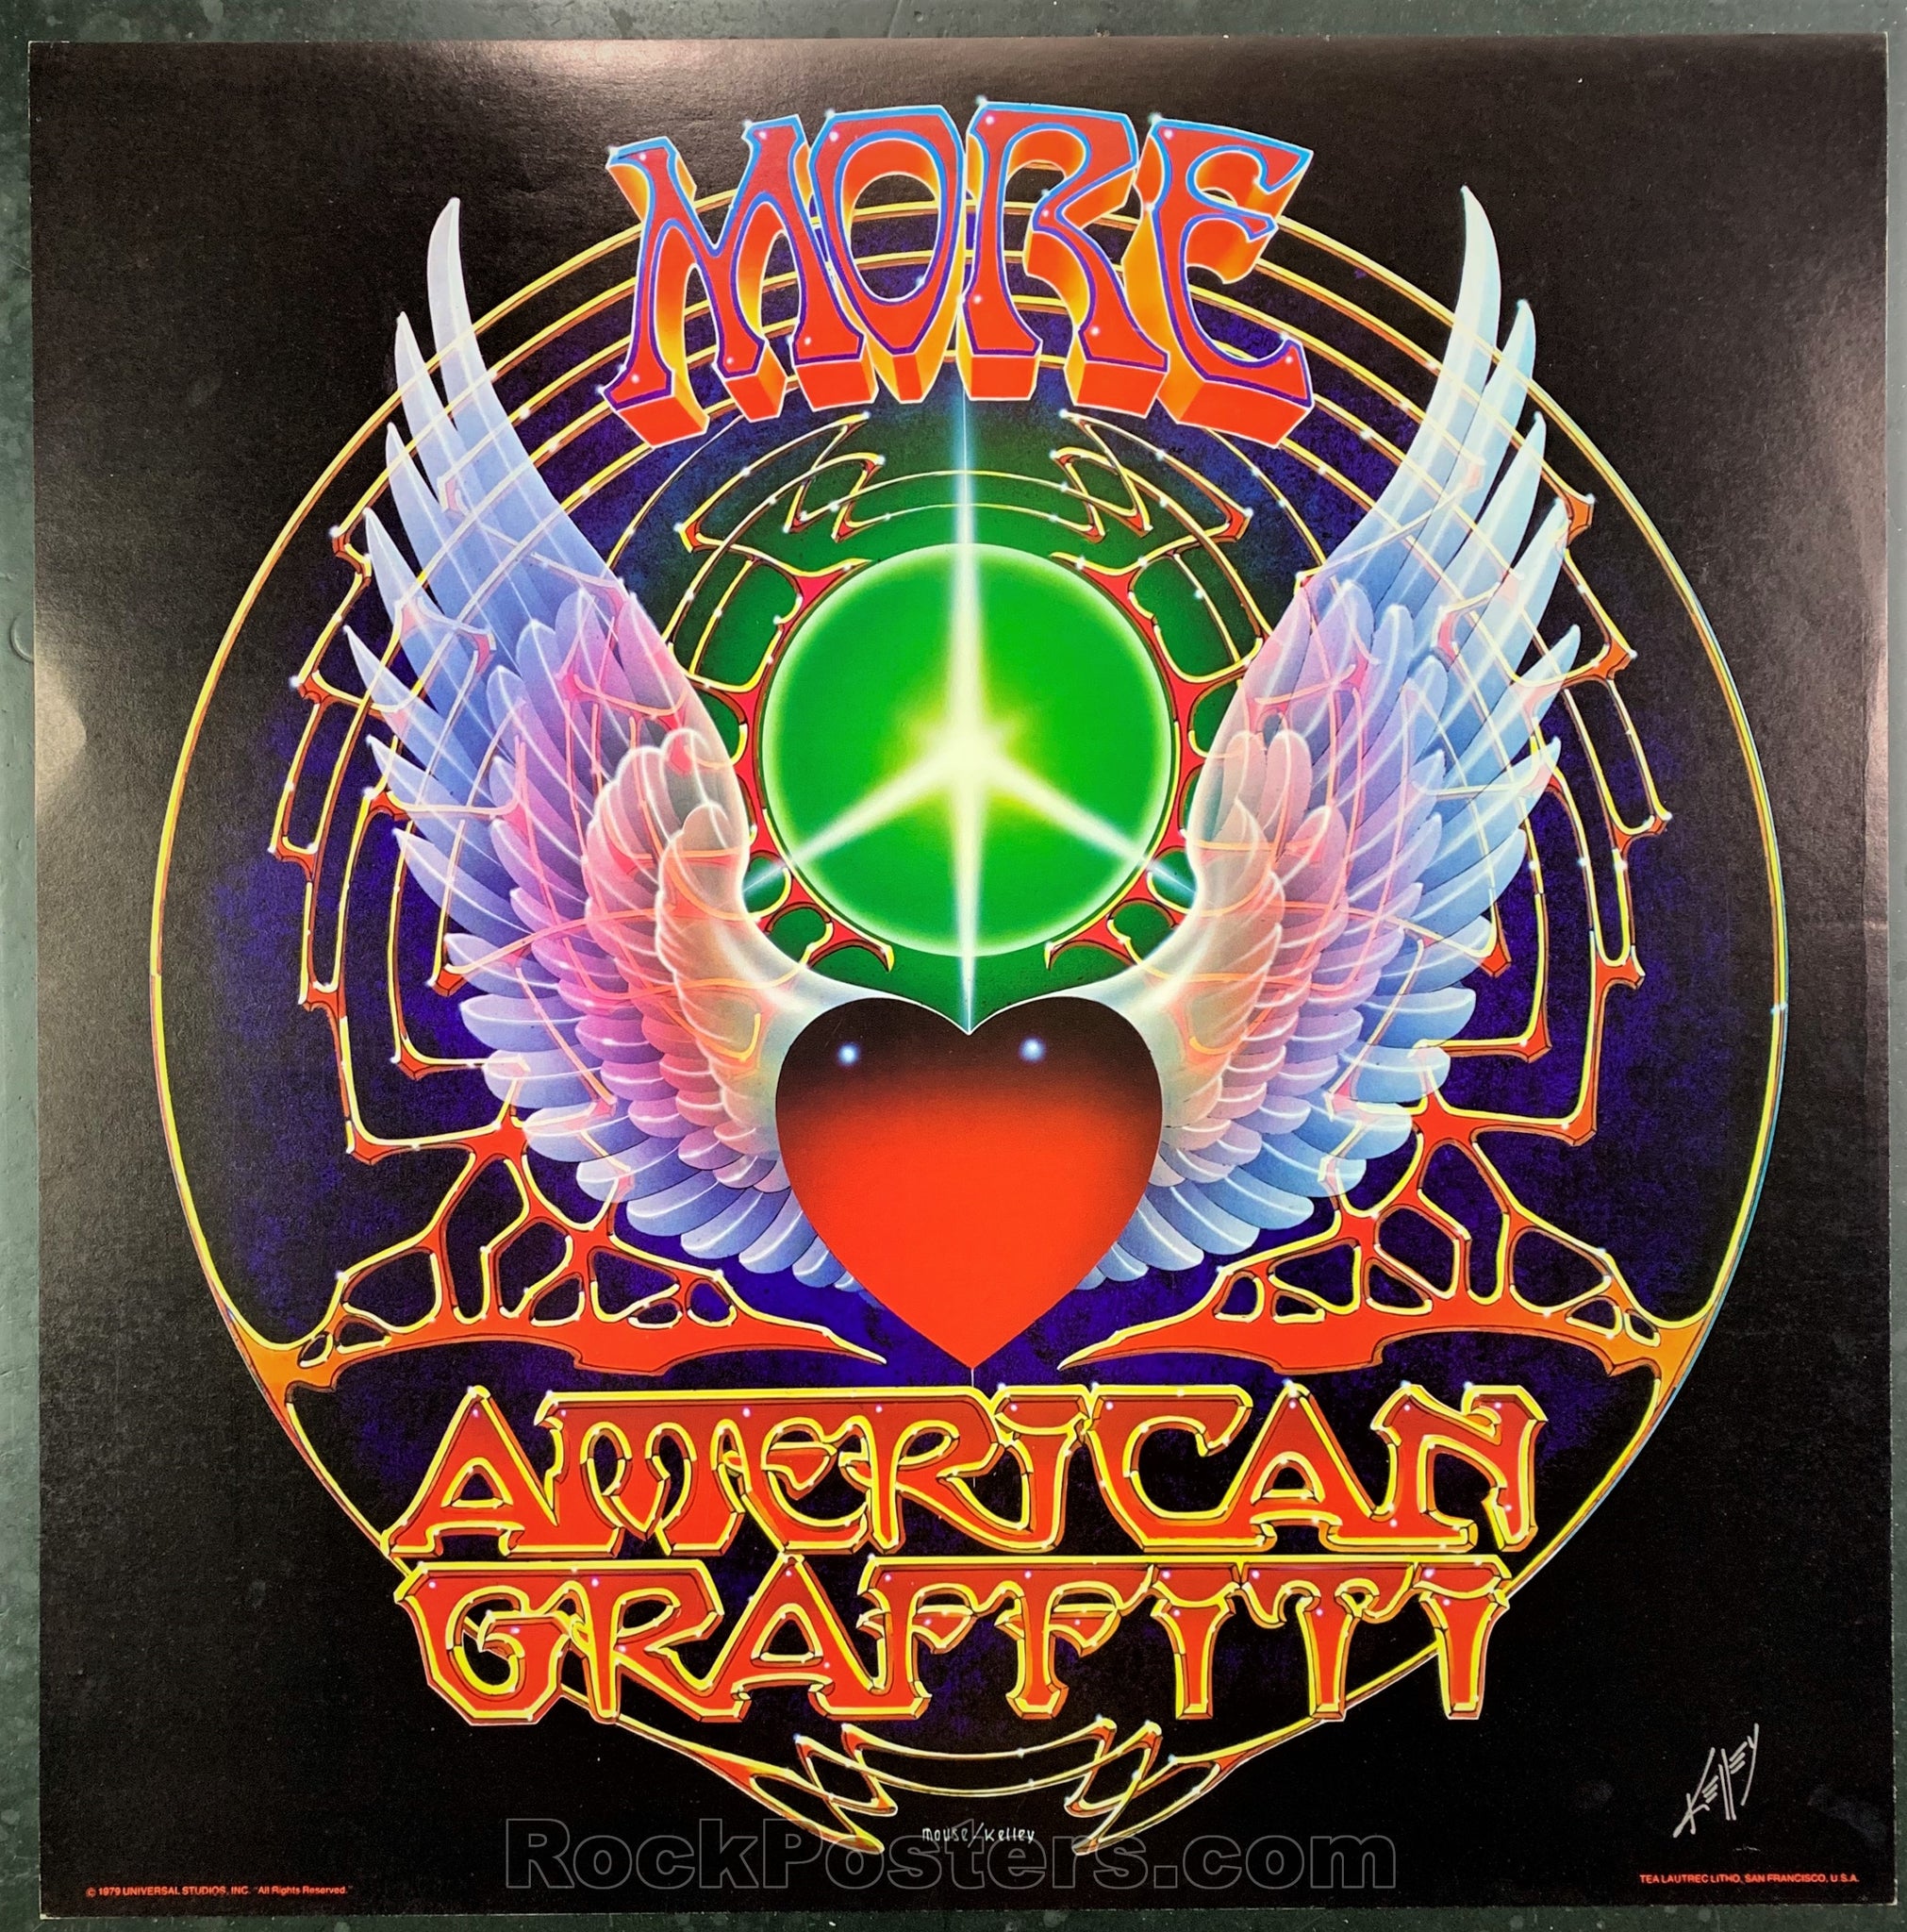 AUCTION - Alton Kelley Collection - More American Graffiti - 1978 Poster - Kelley Signed - Near Mint Minus